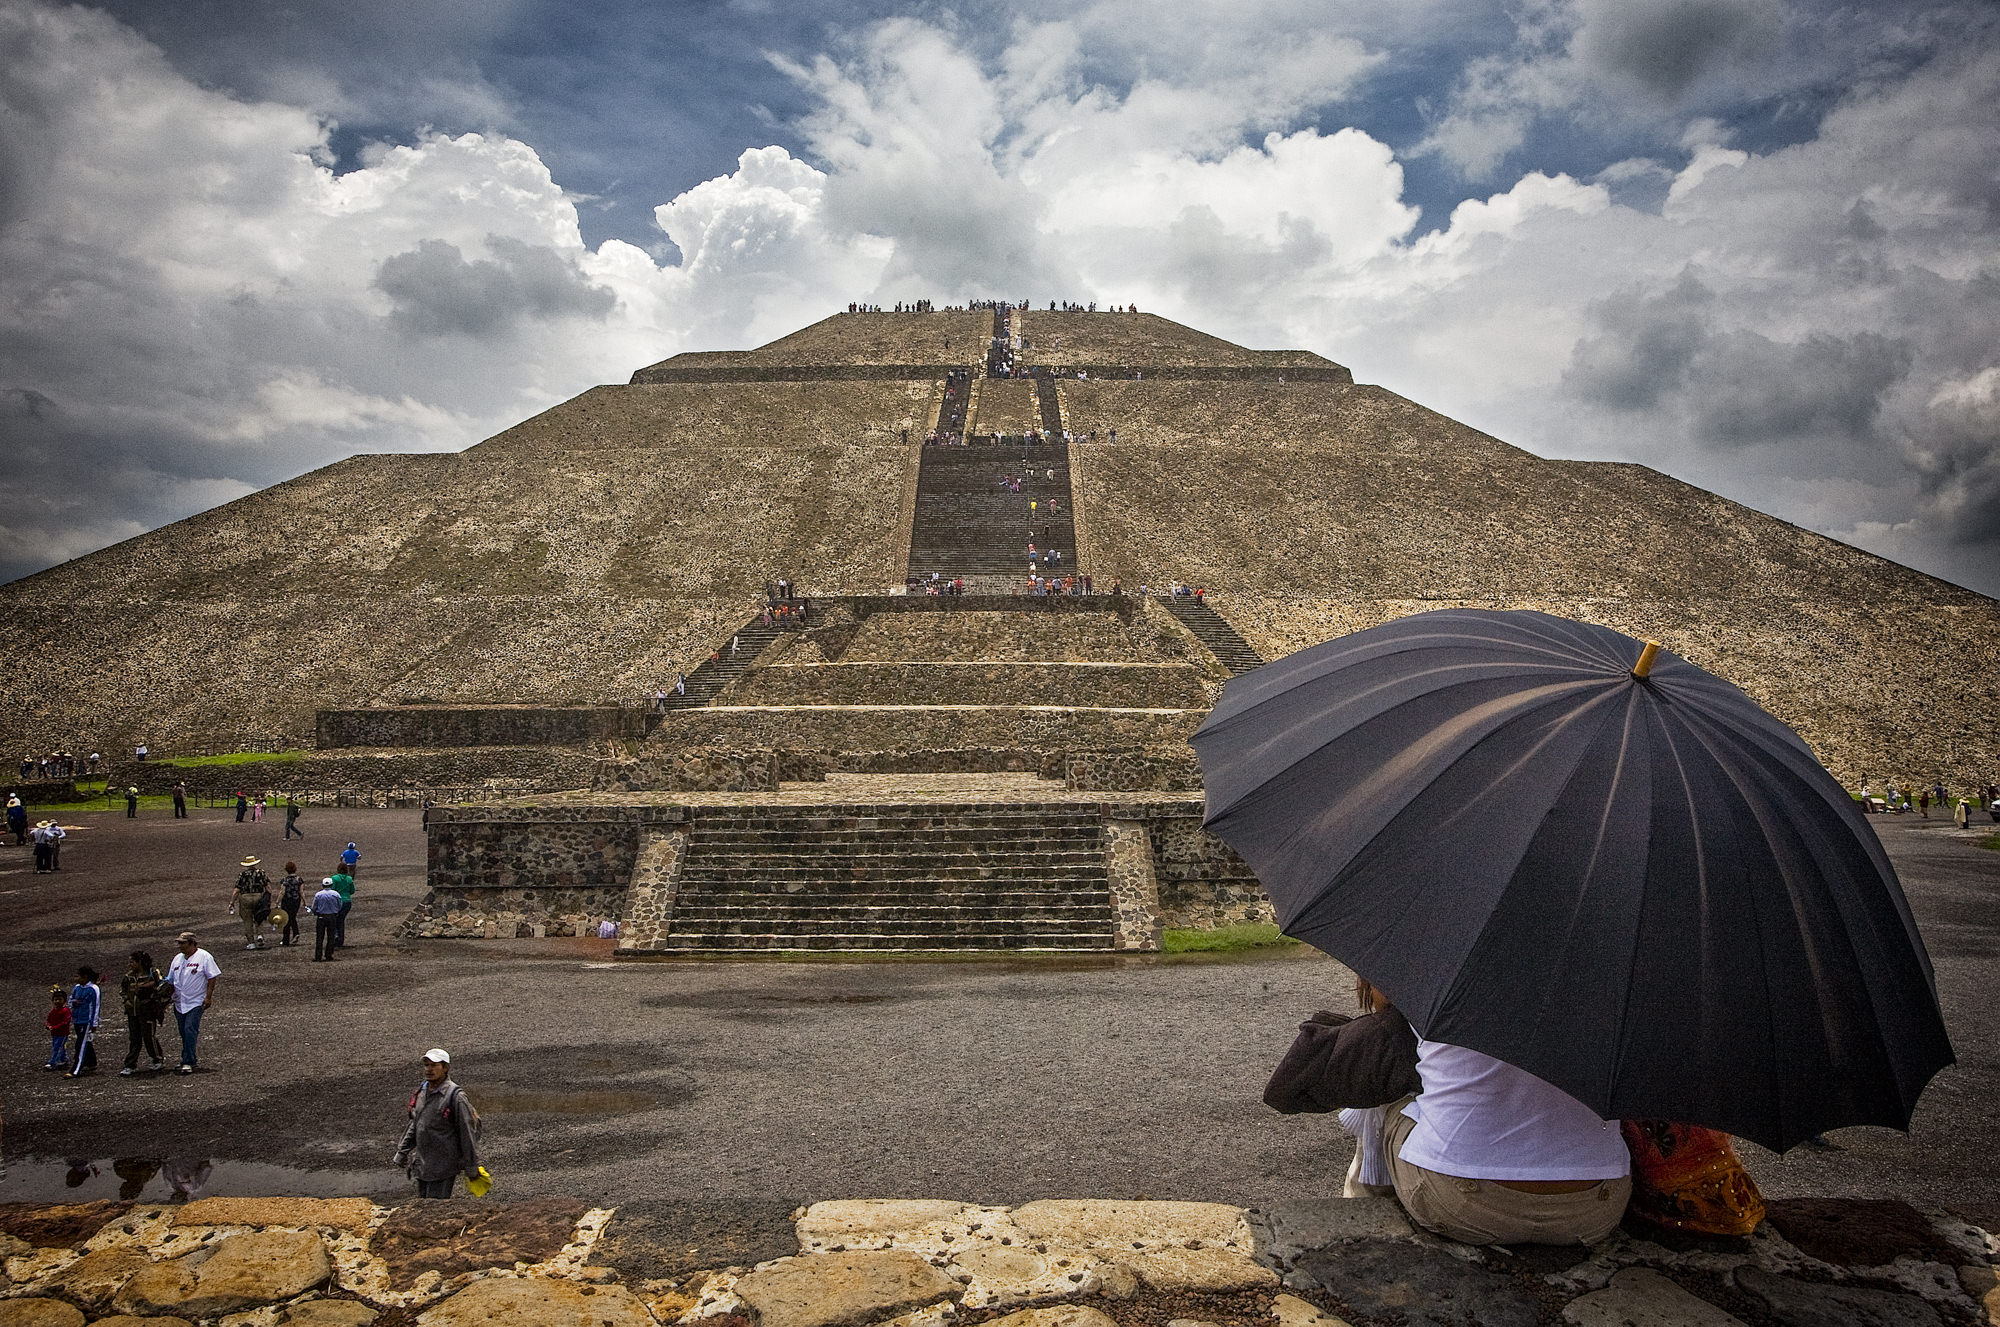 Pyramid of the Sun, Canon 5D with 16-35 f2.8 lens set to 26mm and f/22, 1/80 sec, ISO 400